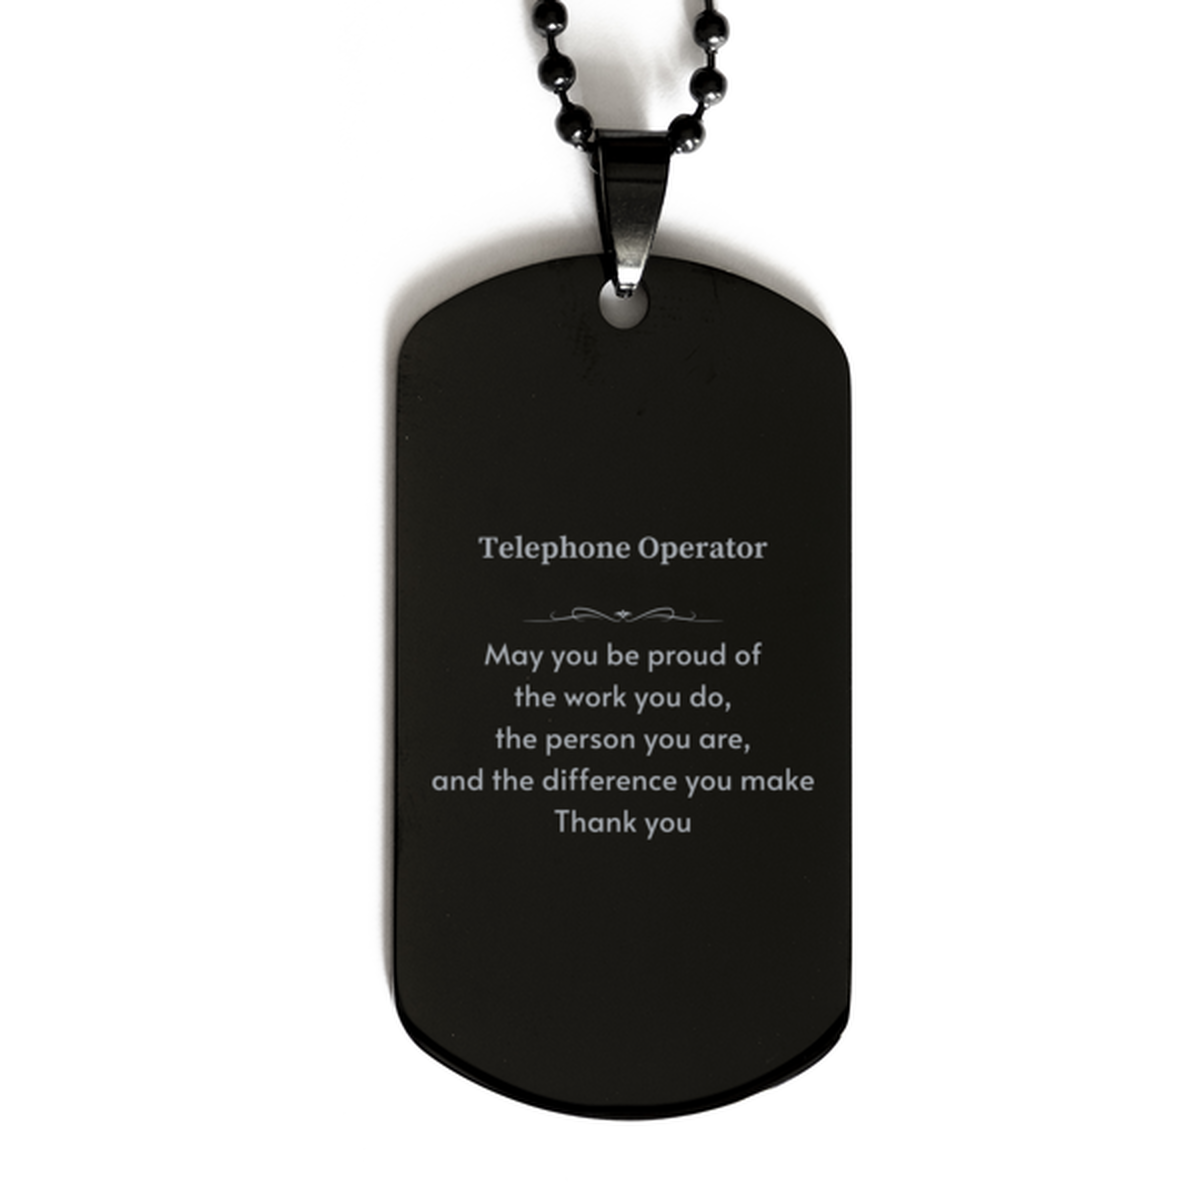 Heartwarming Black Dog Tag Retirement Coworkers Gifts for Telephone Operator, Telephone Operator May You be proud of the work you do, the person you are Gifts for Boss Men Women Friends